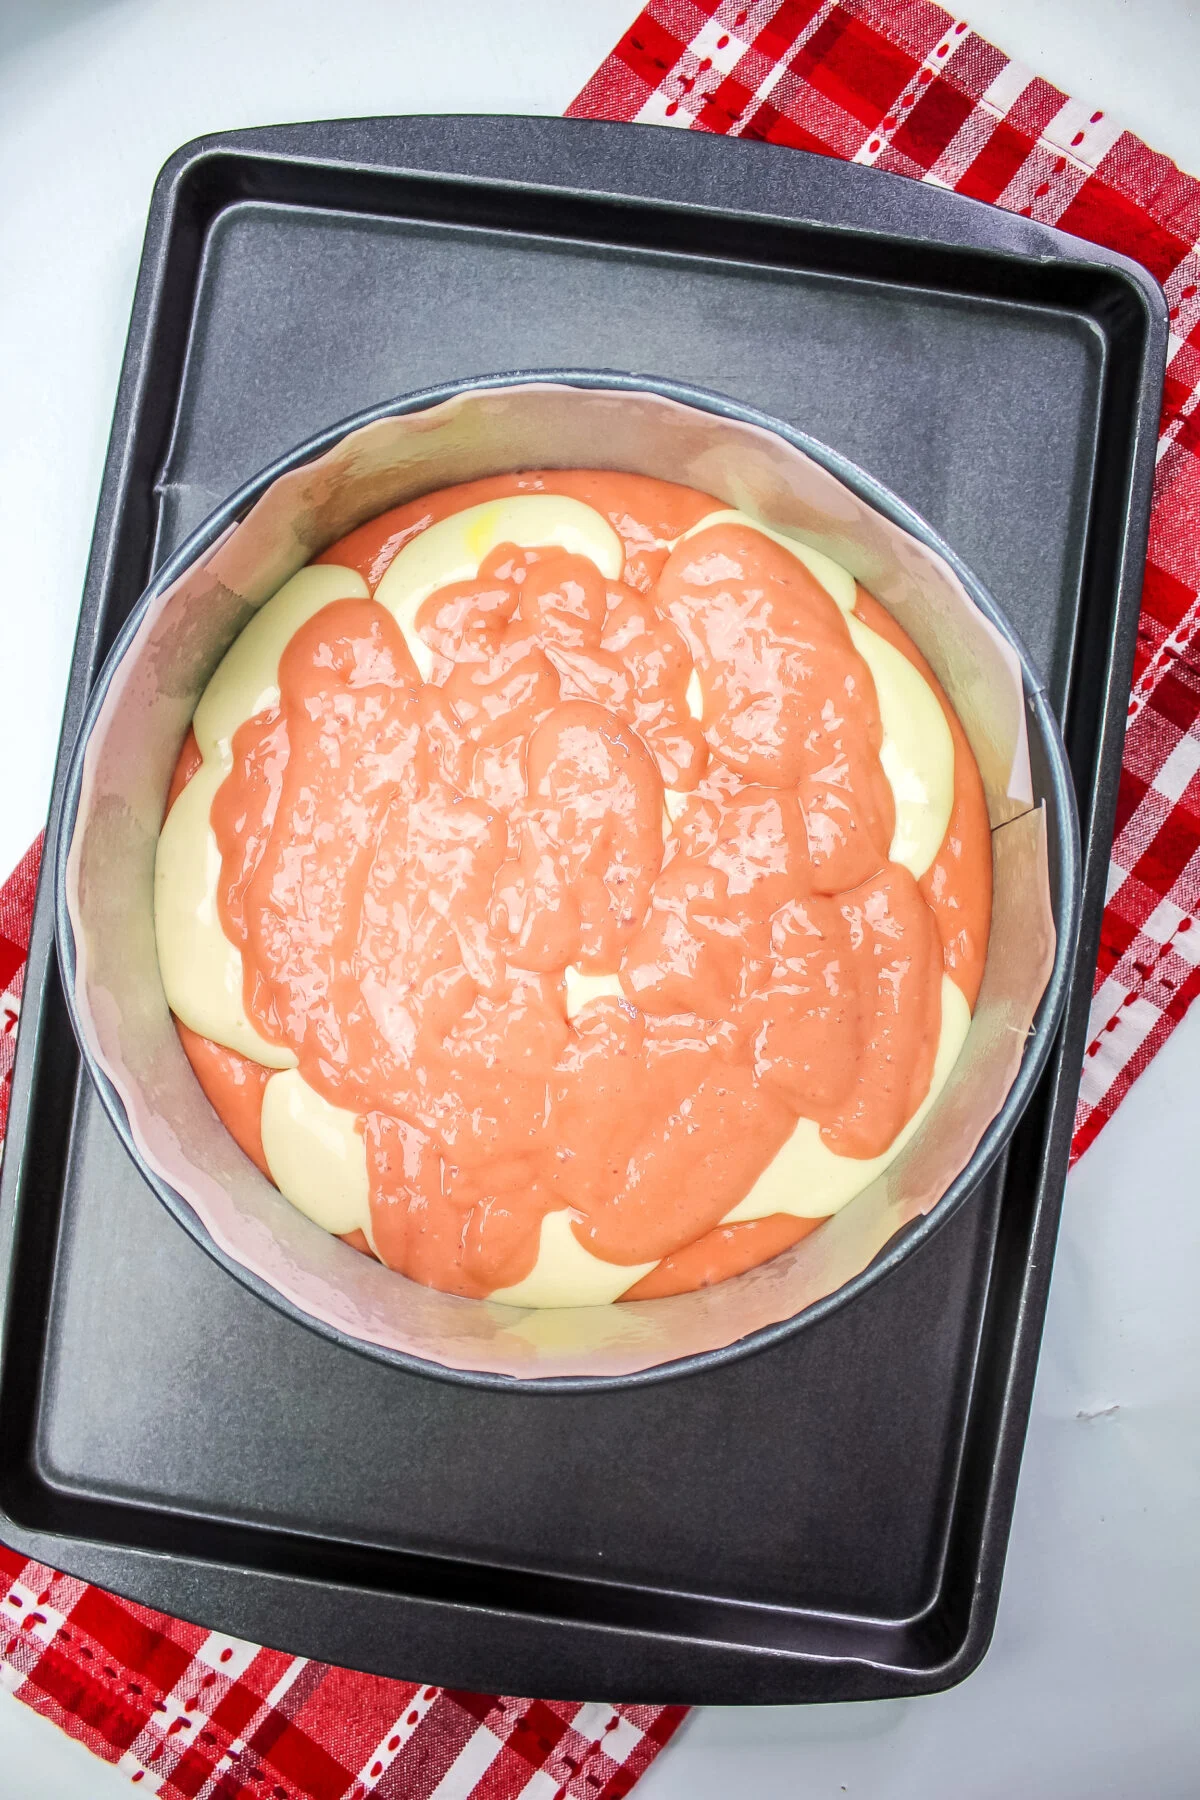 Strawberry cake batter poured over the cheesecake filling.